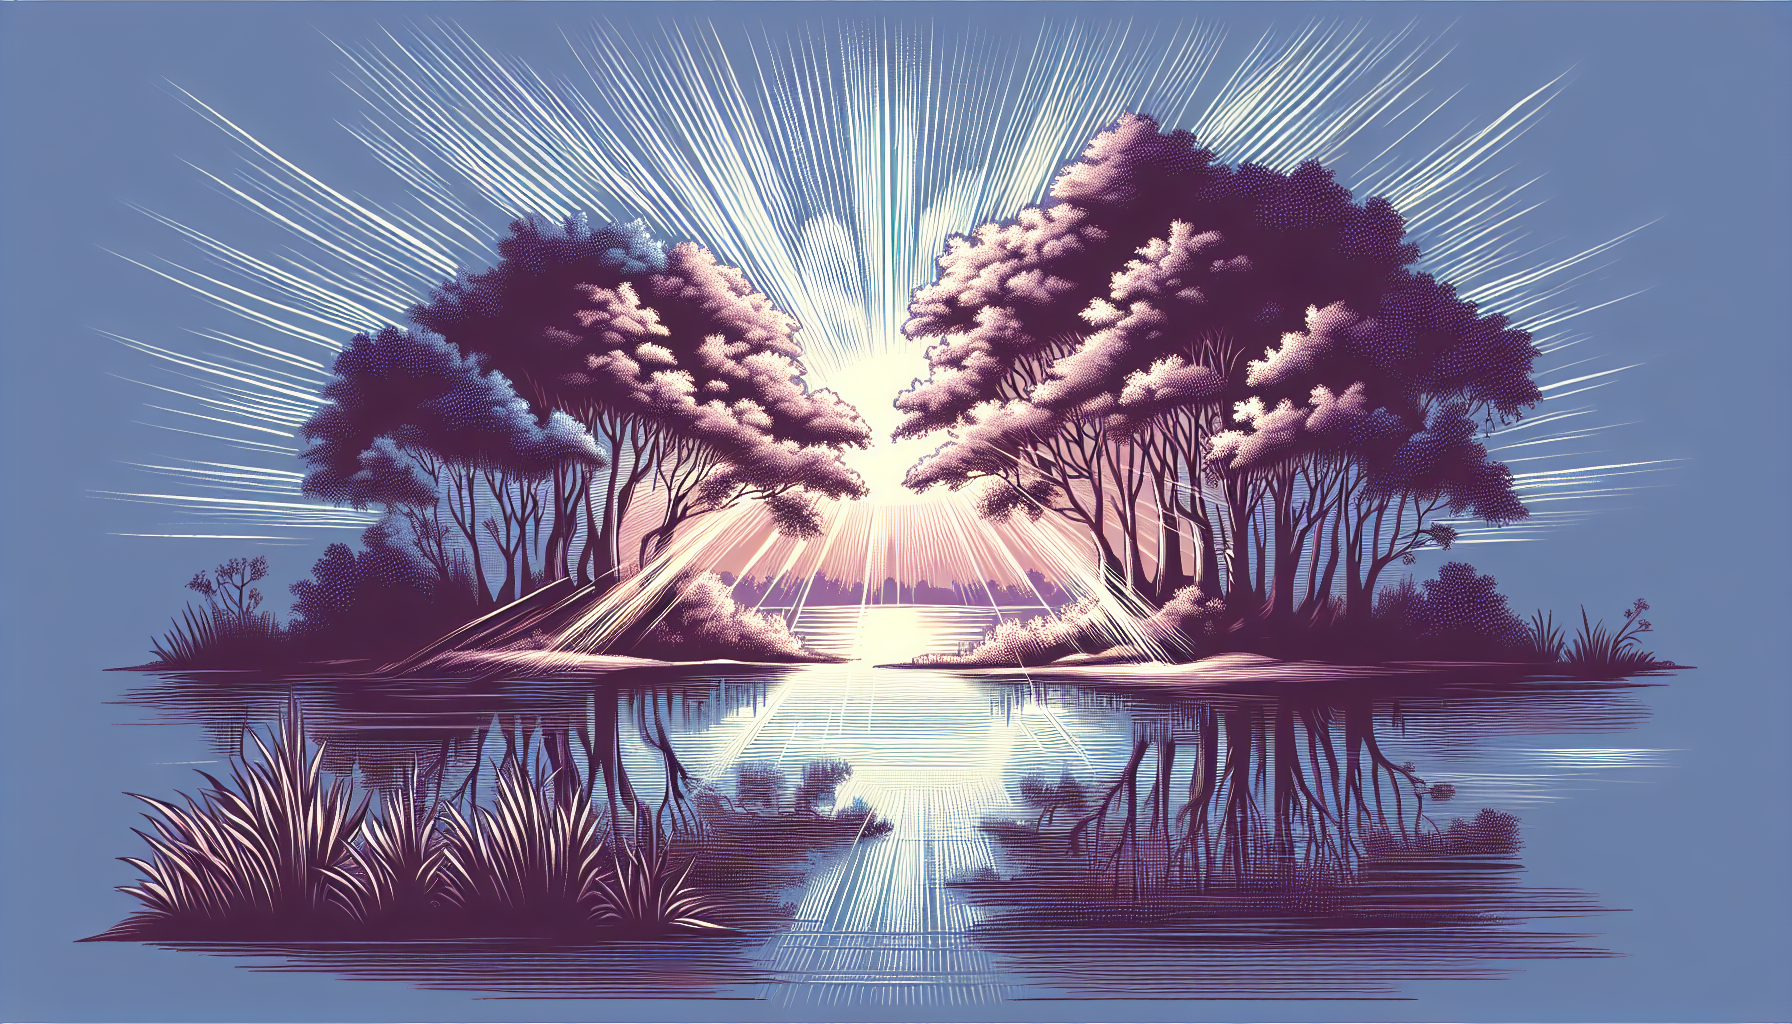 Serene landscape at twilight showcasing the essence of light overcoming darkness, embodyed by gentle rays piercing through the trees beside a tranquil lake, symbolizing the biblical passage from John